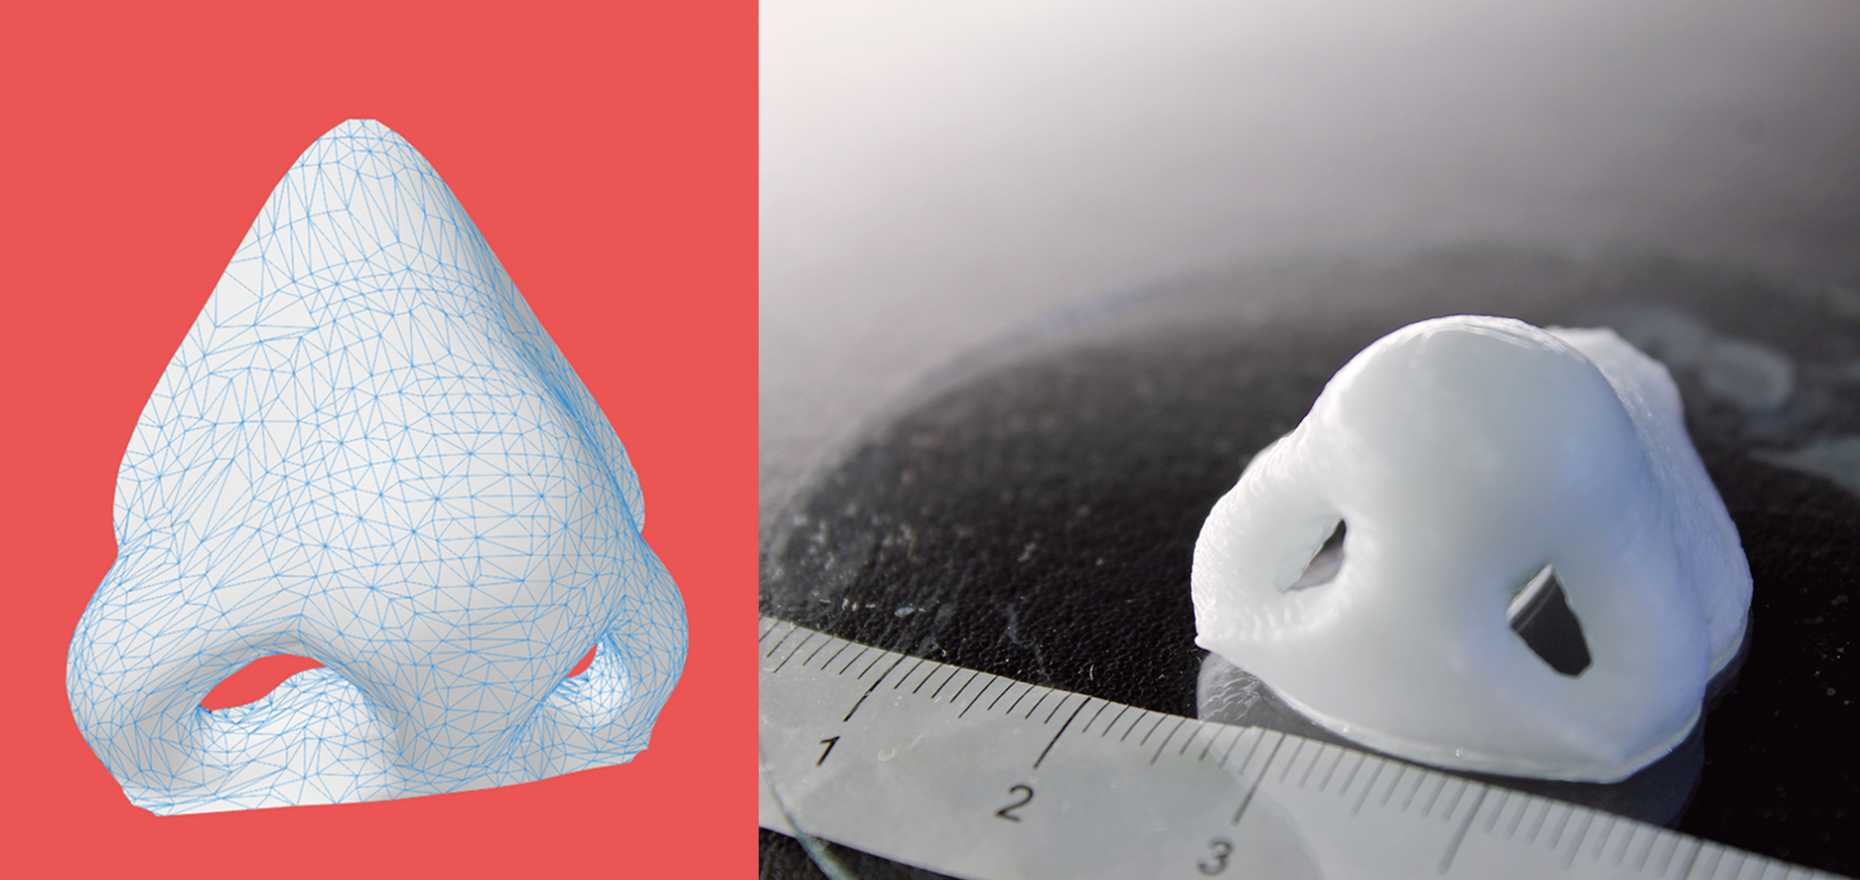 Enlarged view: Computer model and 3D printing object